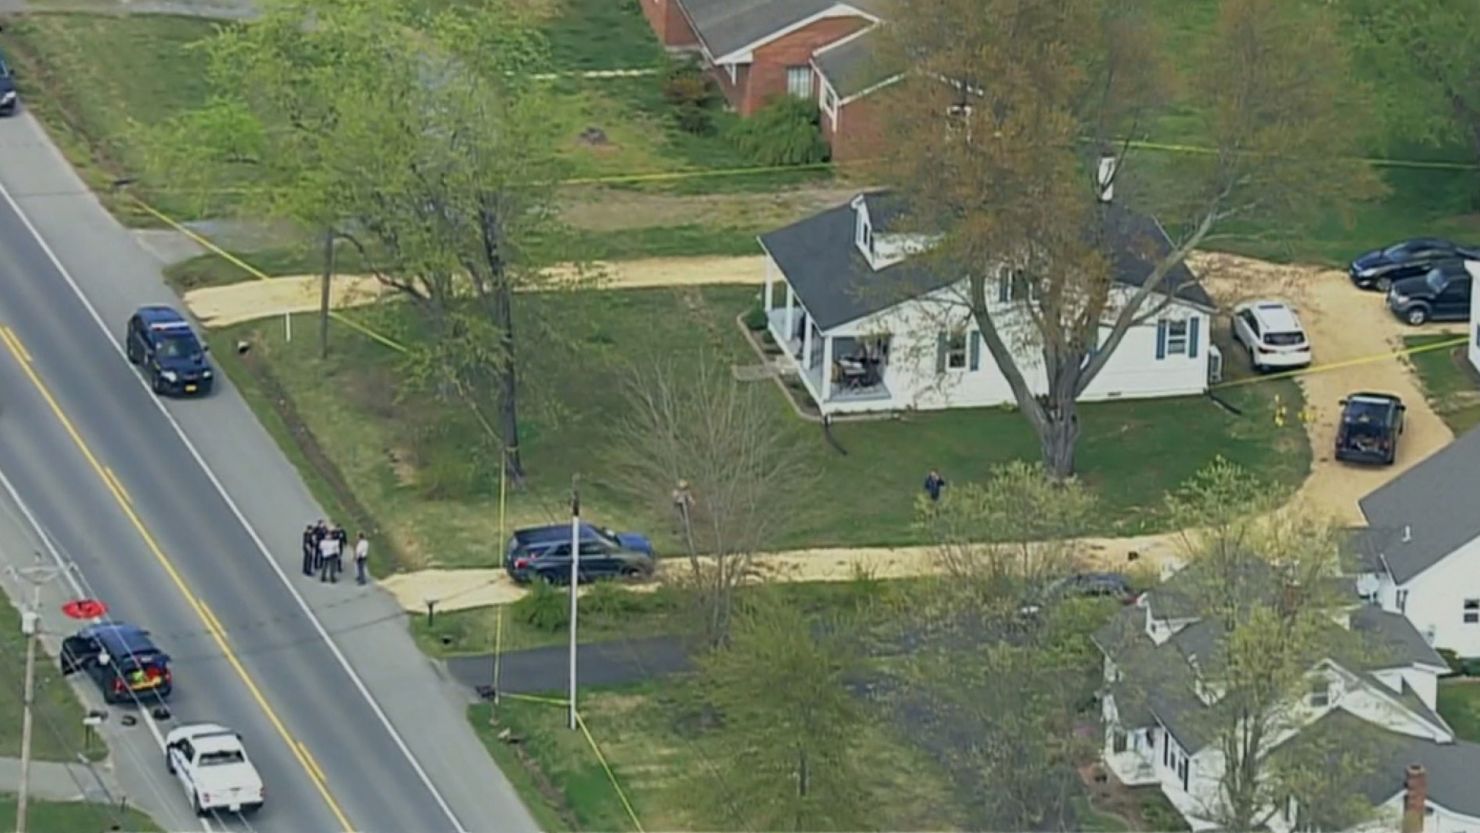 A Maryland state trooper shot and killed a 16-year-old on Tuesday afternoon.